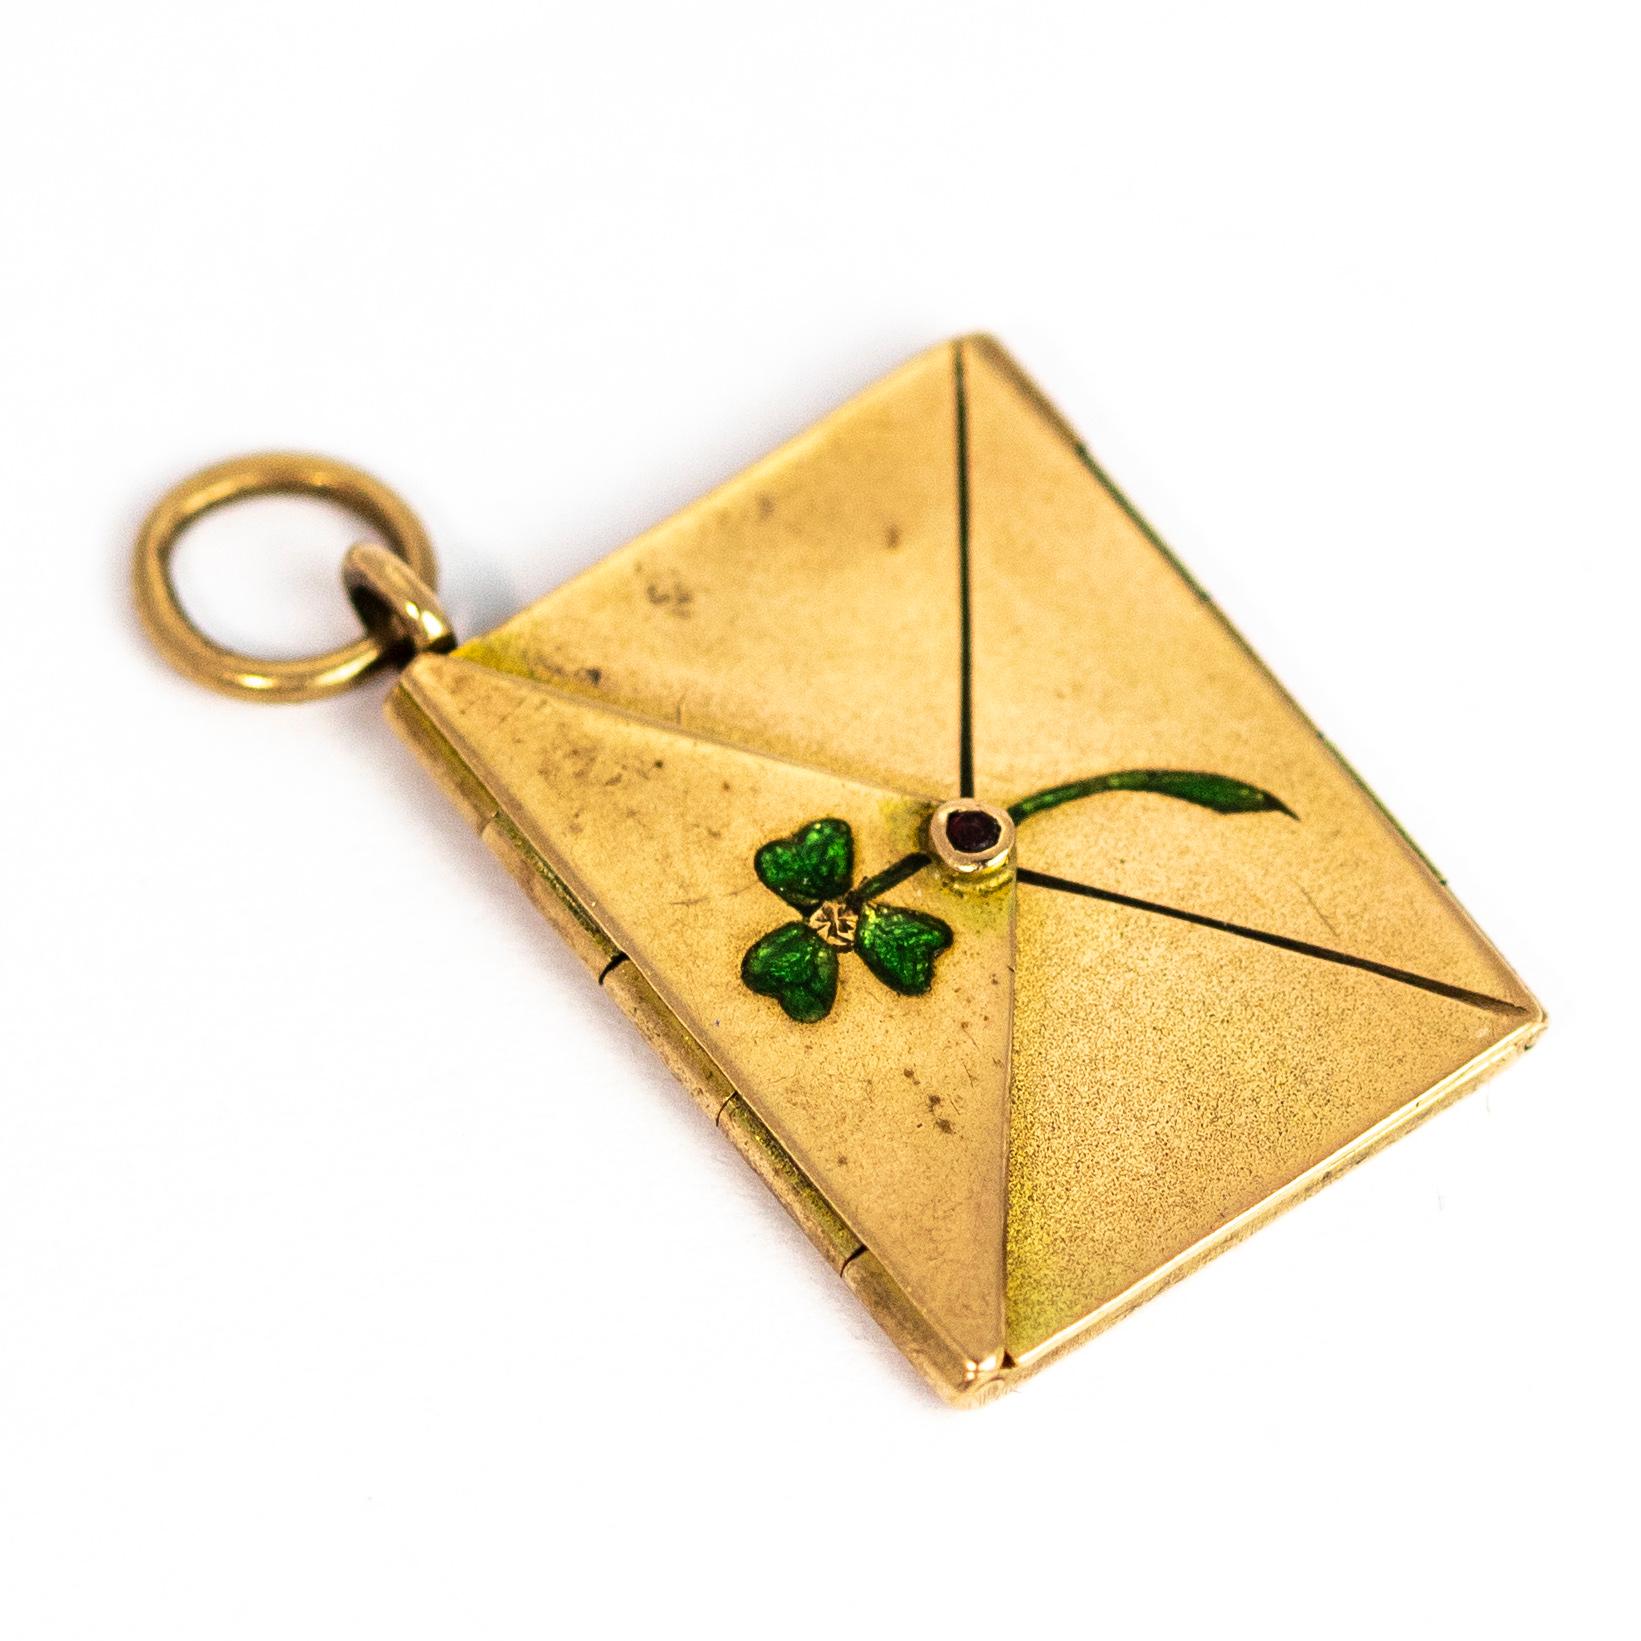 How wonderful is this locket!? The detail starts with the shimmery green clover on the front of the envelope and just below the leaves sit a tiny garnet. When you open the envelope it looks like nothing sits inside but when you open it further there